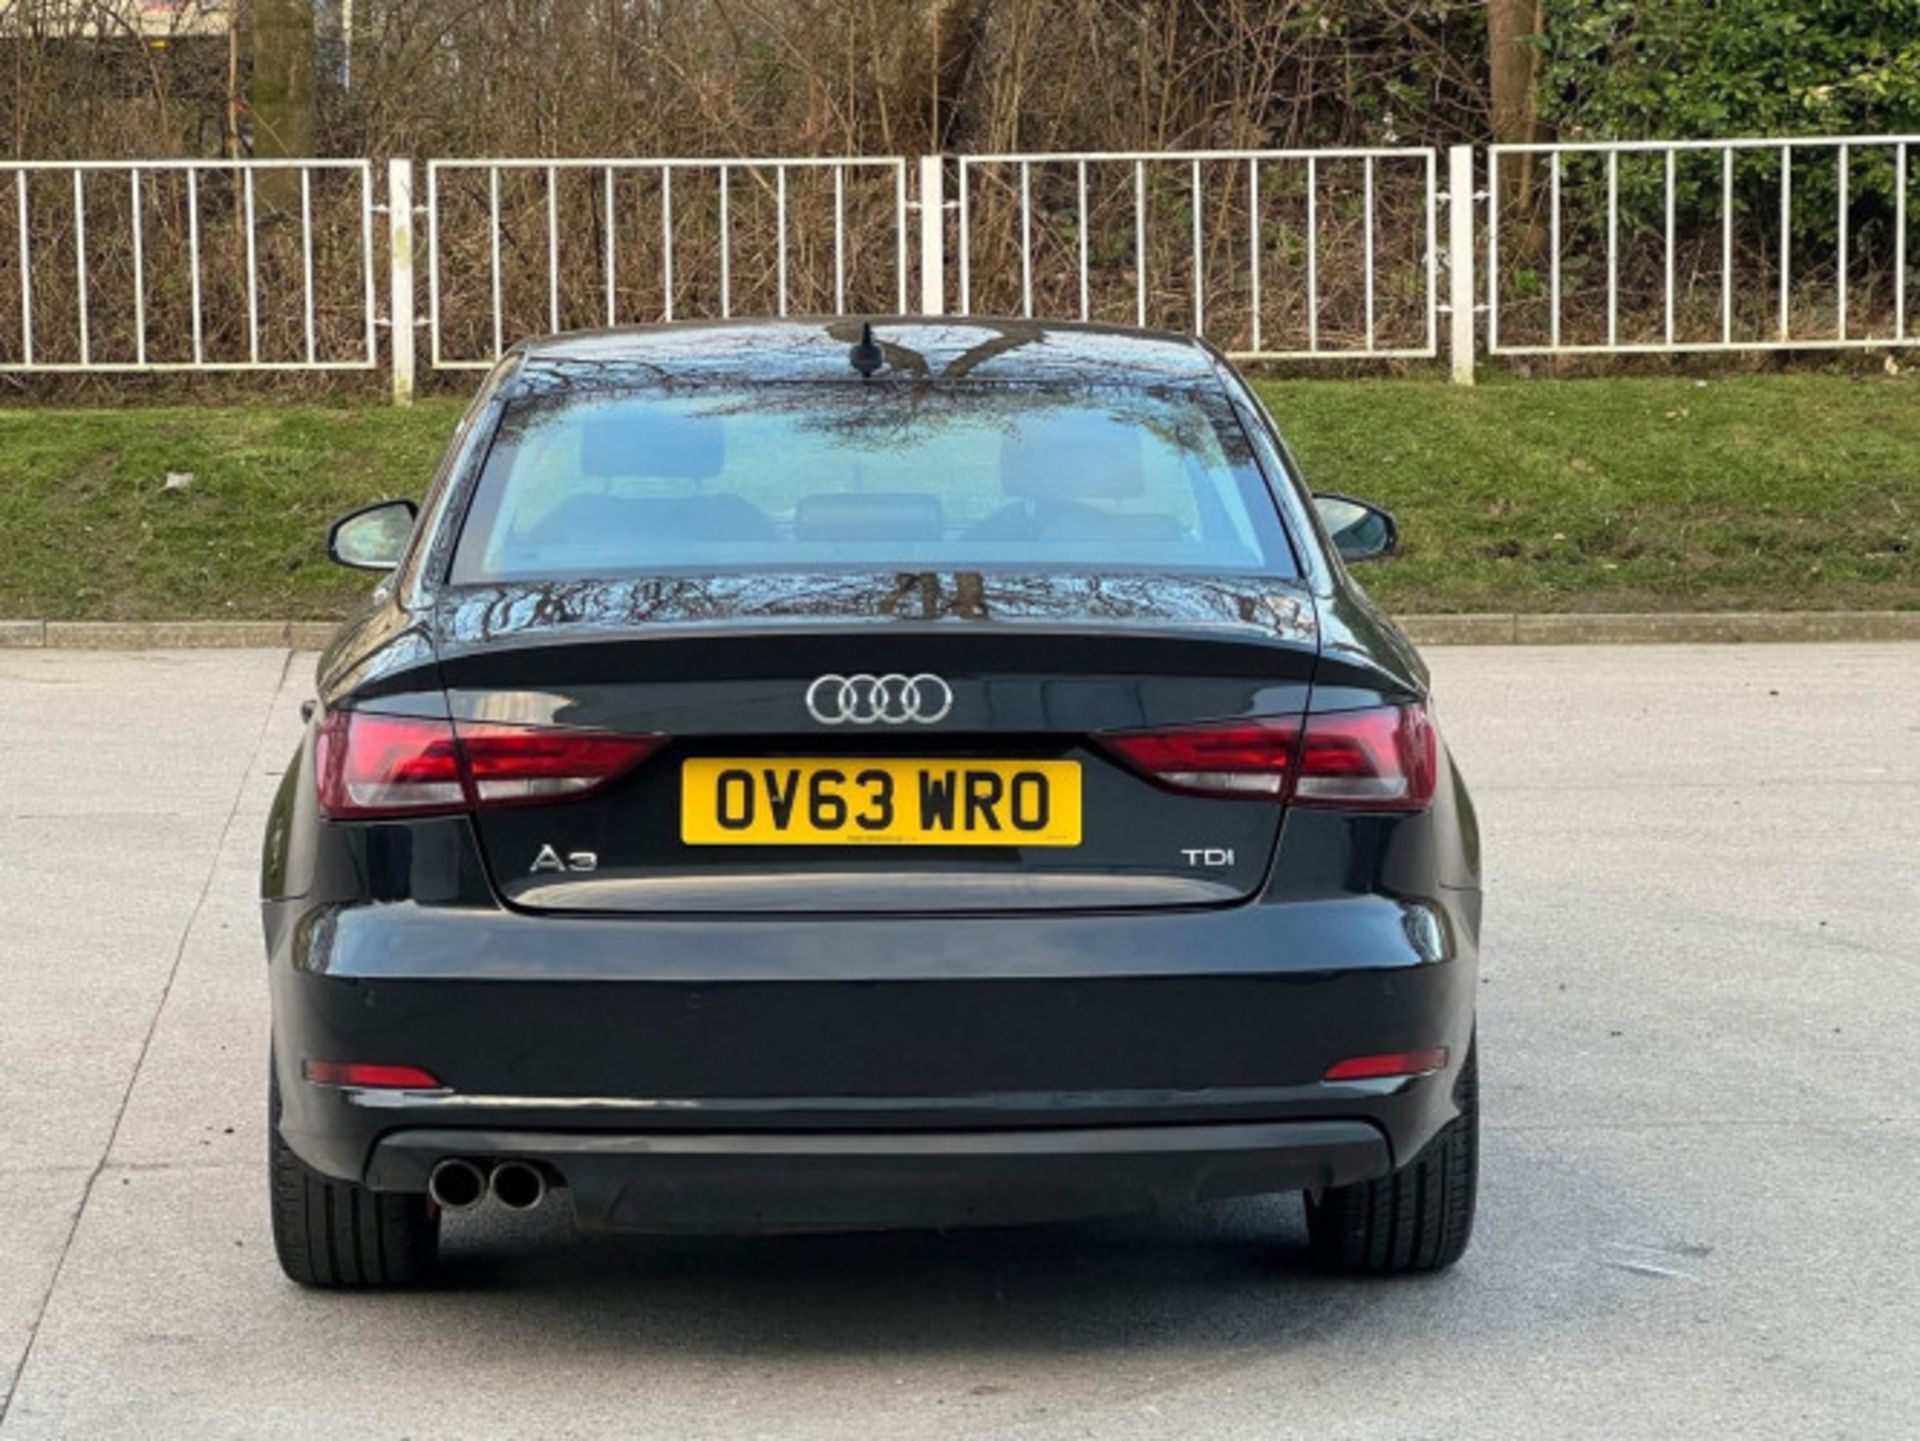 AUDI A3 2.0TDI SPORTBACK - STYLE, PERFORMANCE, AND COMFORT COMBINED >>--NO VAT ON HAMMER--<< - Image 209 of 216